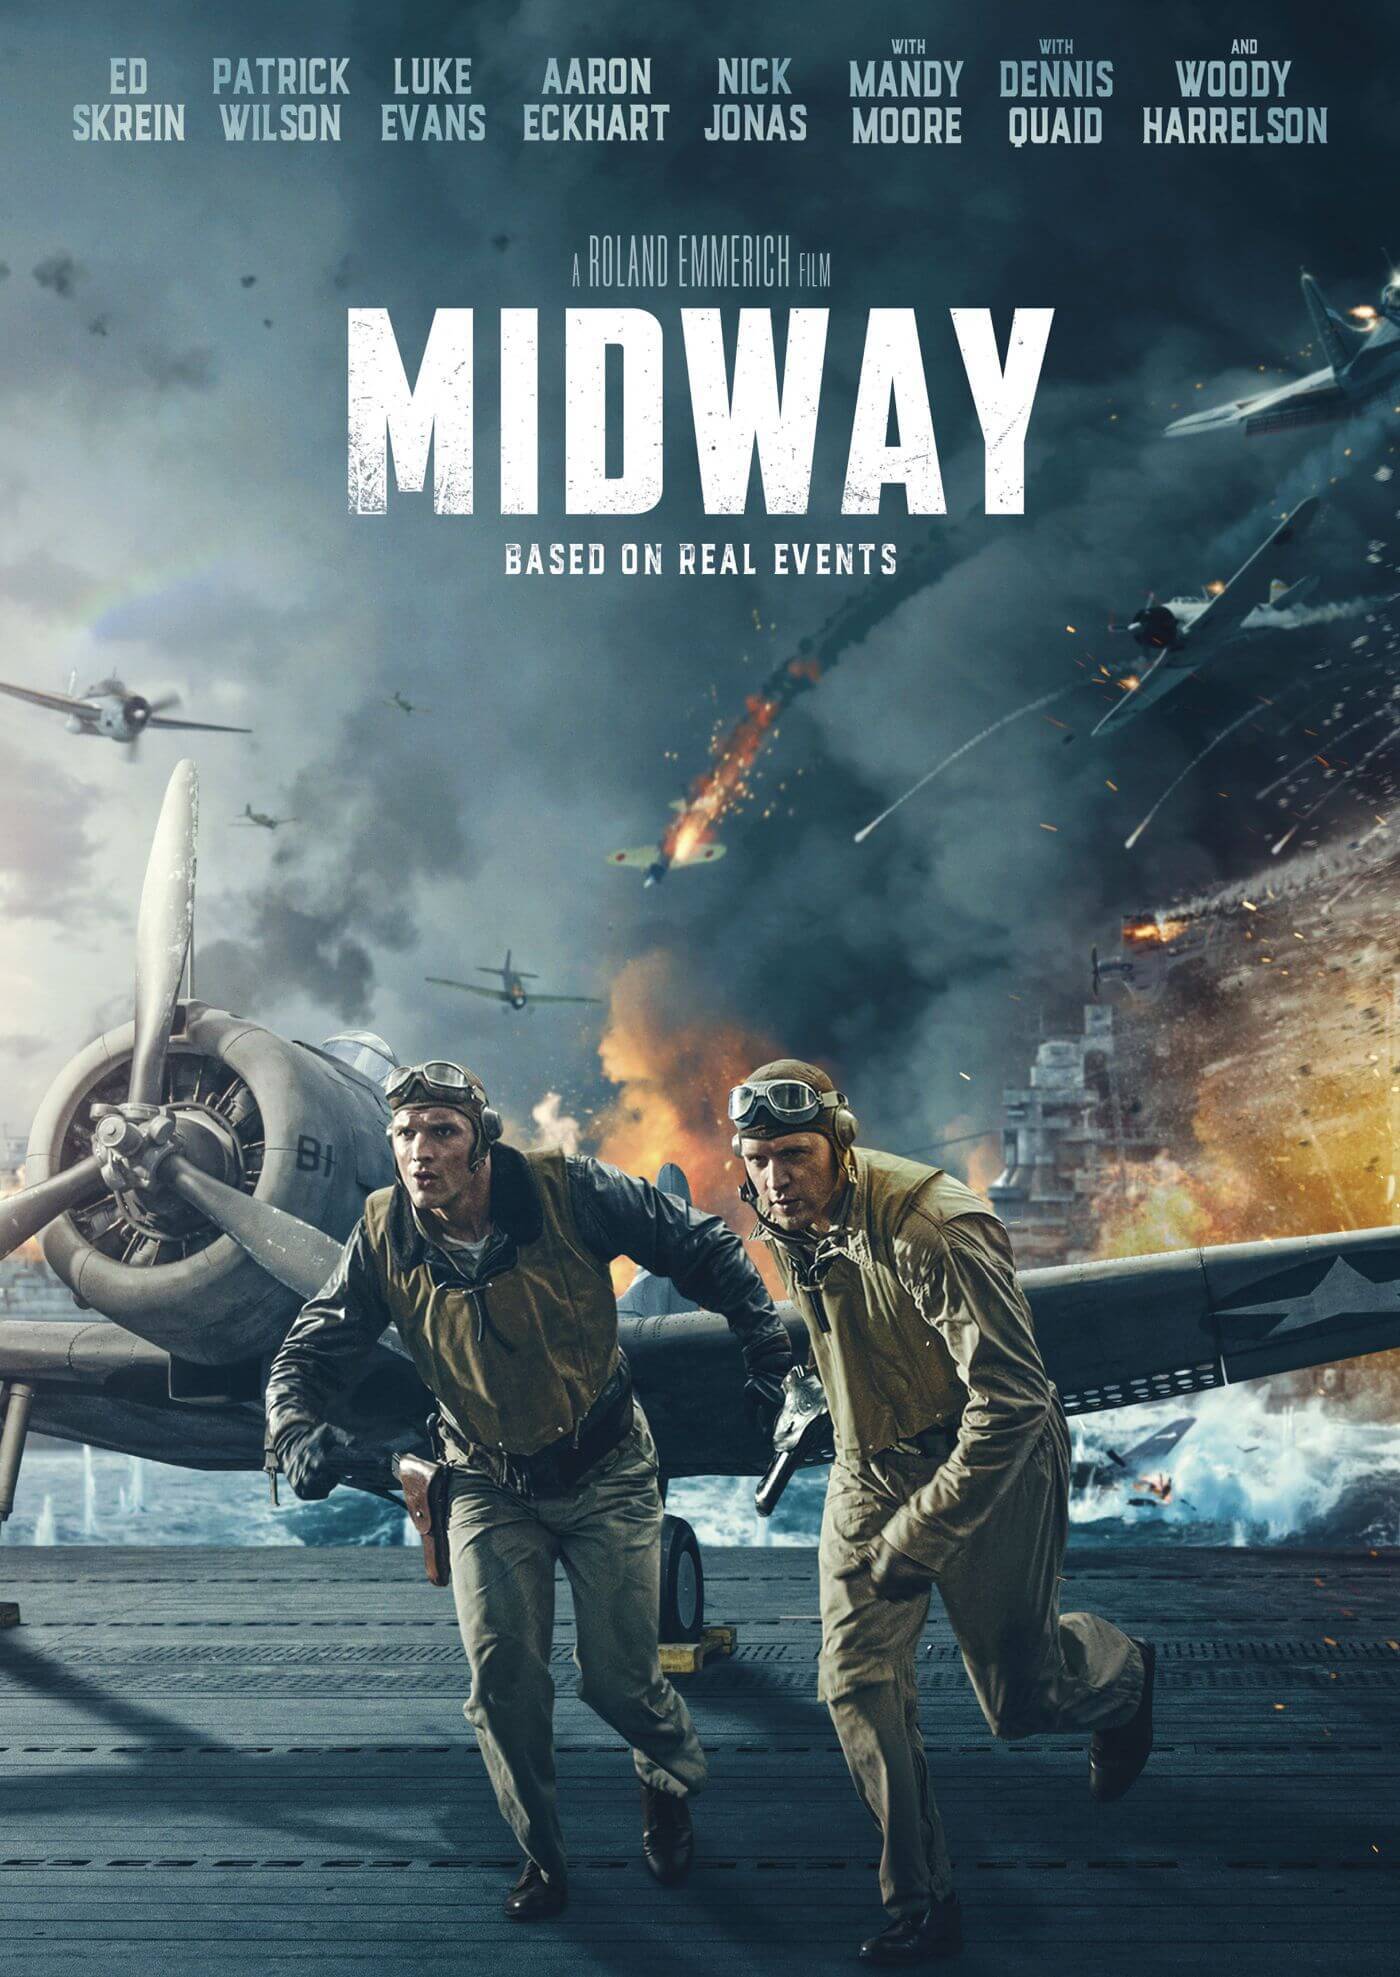 Midway 19 Ed Skrein Hollywood War Ww2 Movie Poster Life Size Posters By Kaiden Thompson Buy Posters Frames Canvas Digital Art Prints Small Compact Medium And Large Variants